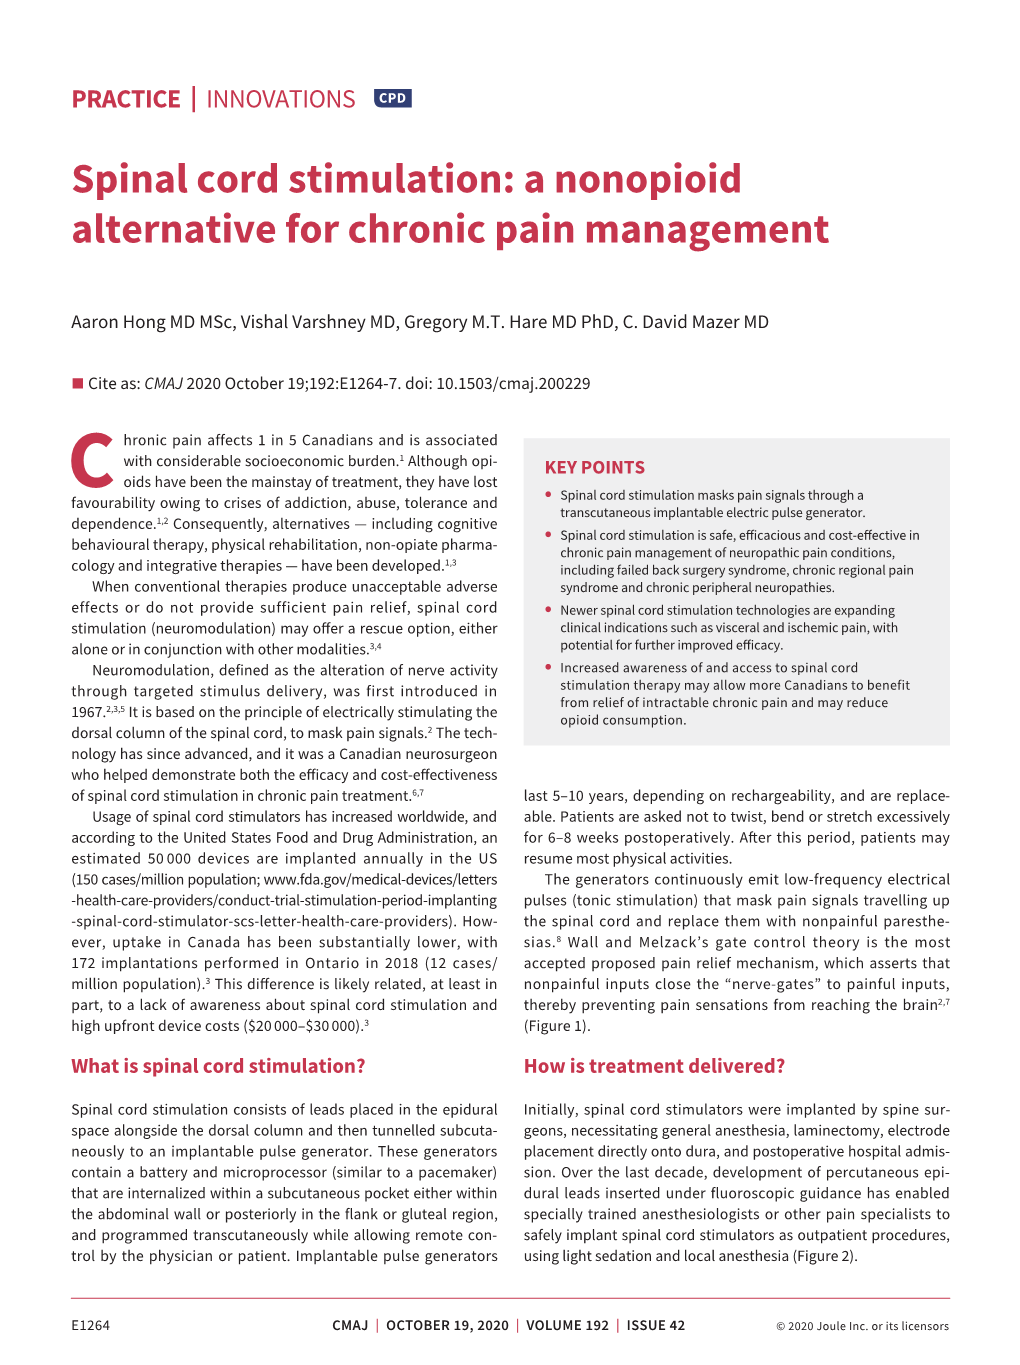 Spinal Cord Stimulation: a Nonopioid Alternative for Chronic Pain Management